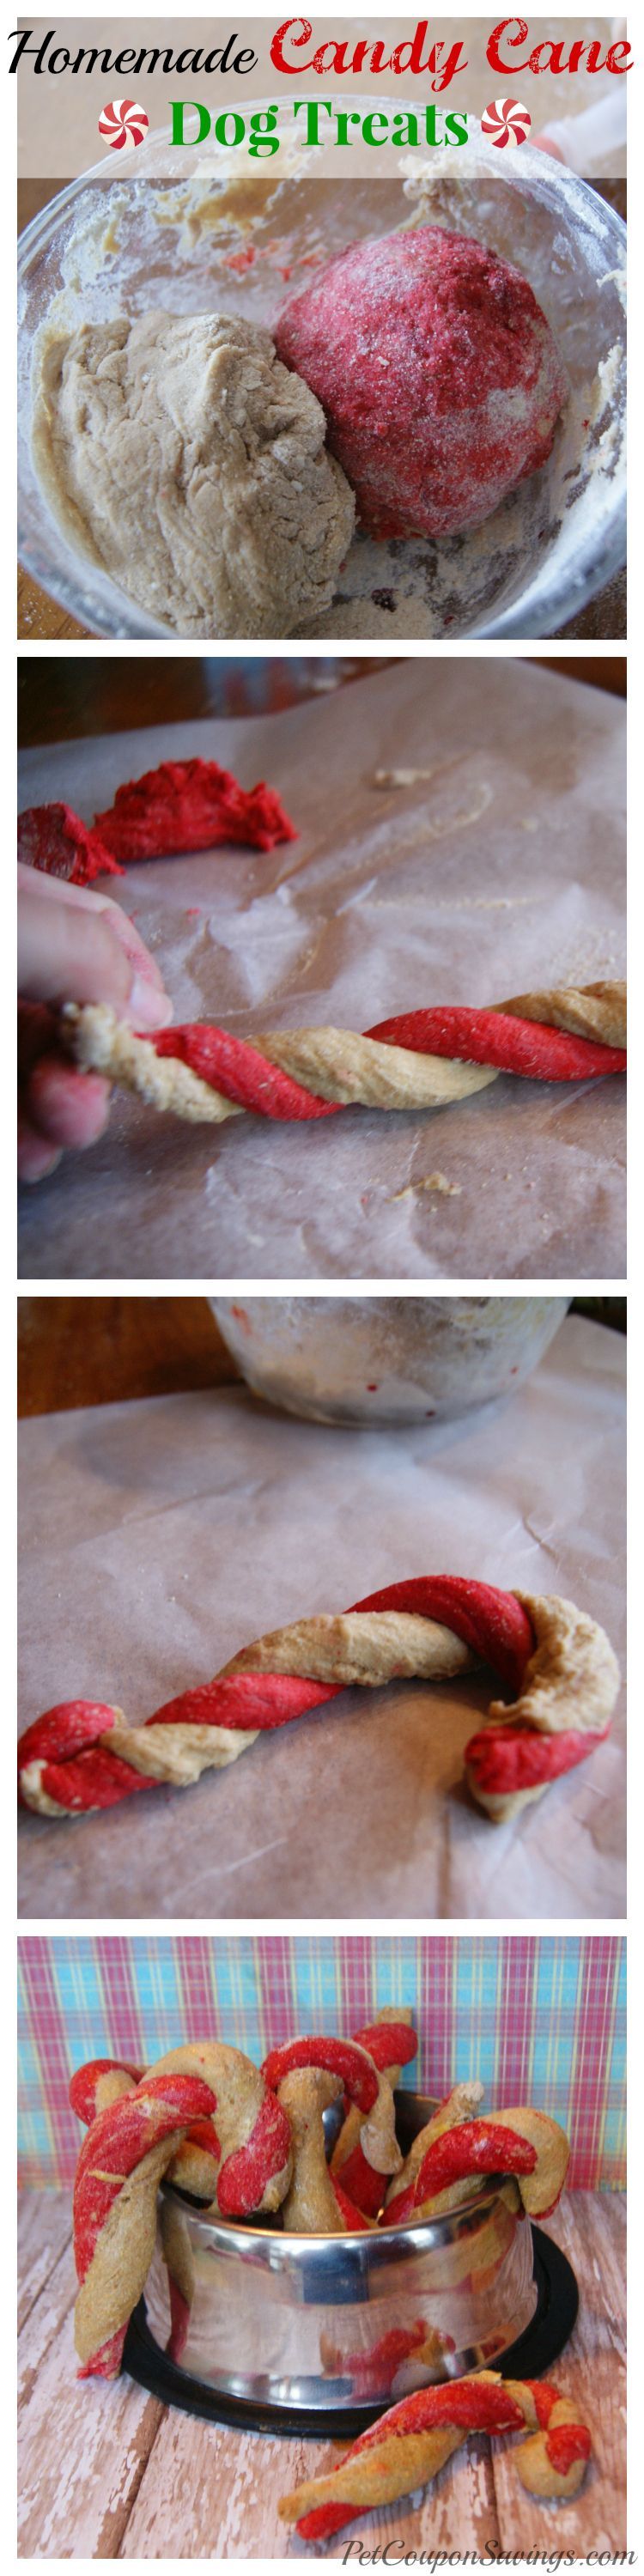 Homemade Candy Cane Dog Treats! (I wouldnt use chicken broth. Never know if was cooked with onions – sub water)